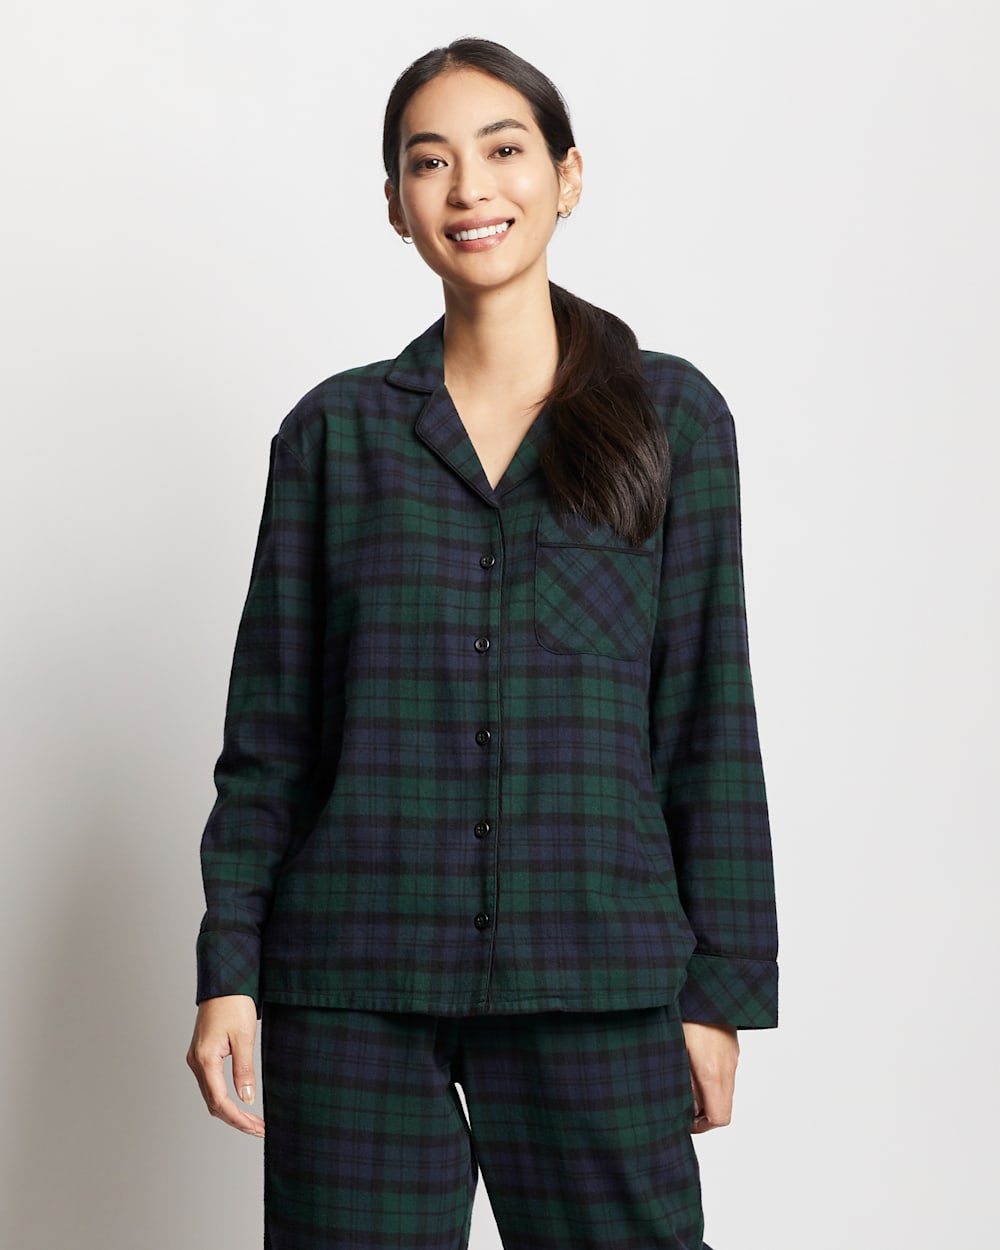 ALTERNATE VIEW OF WOMEN'S PAJAMA SET IN GREEN/BLUE PLAID image number 2